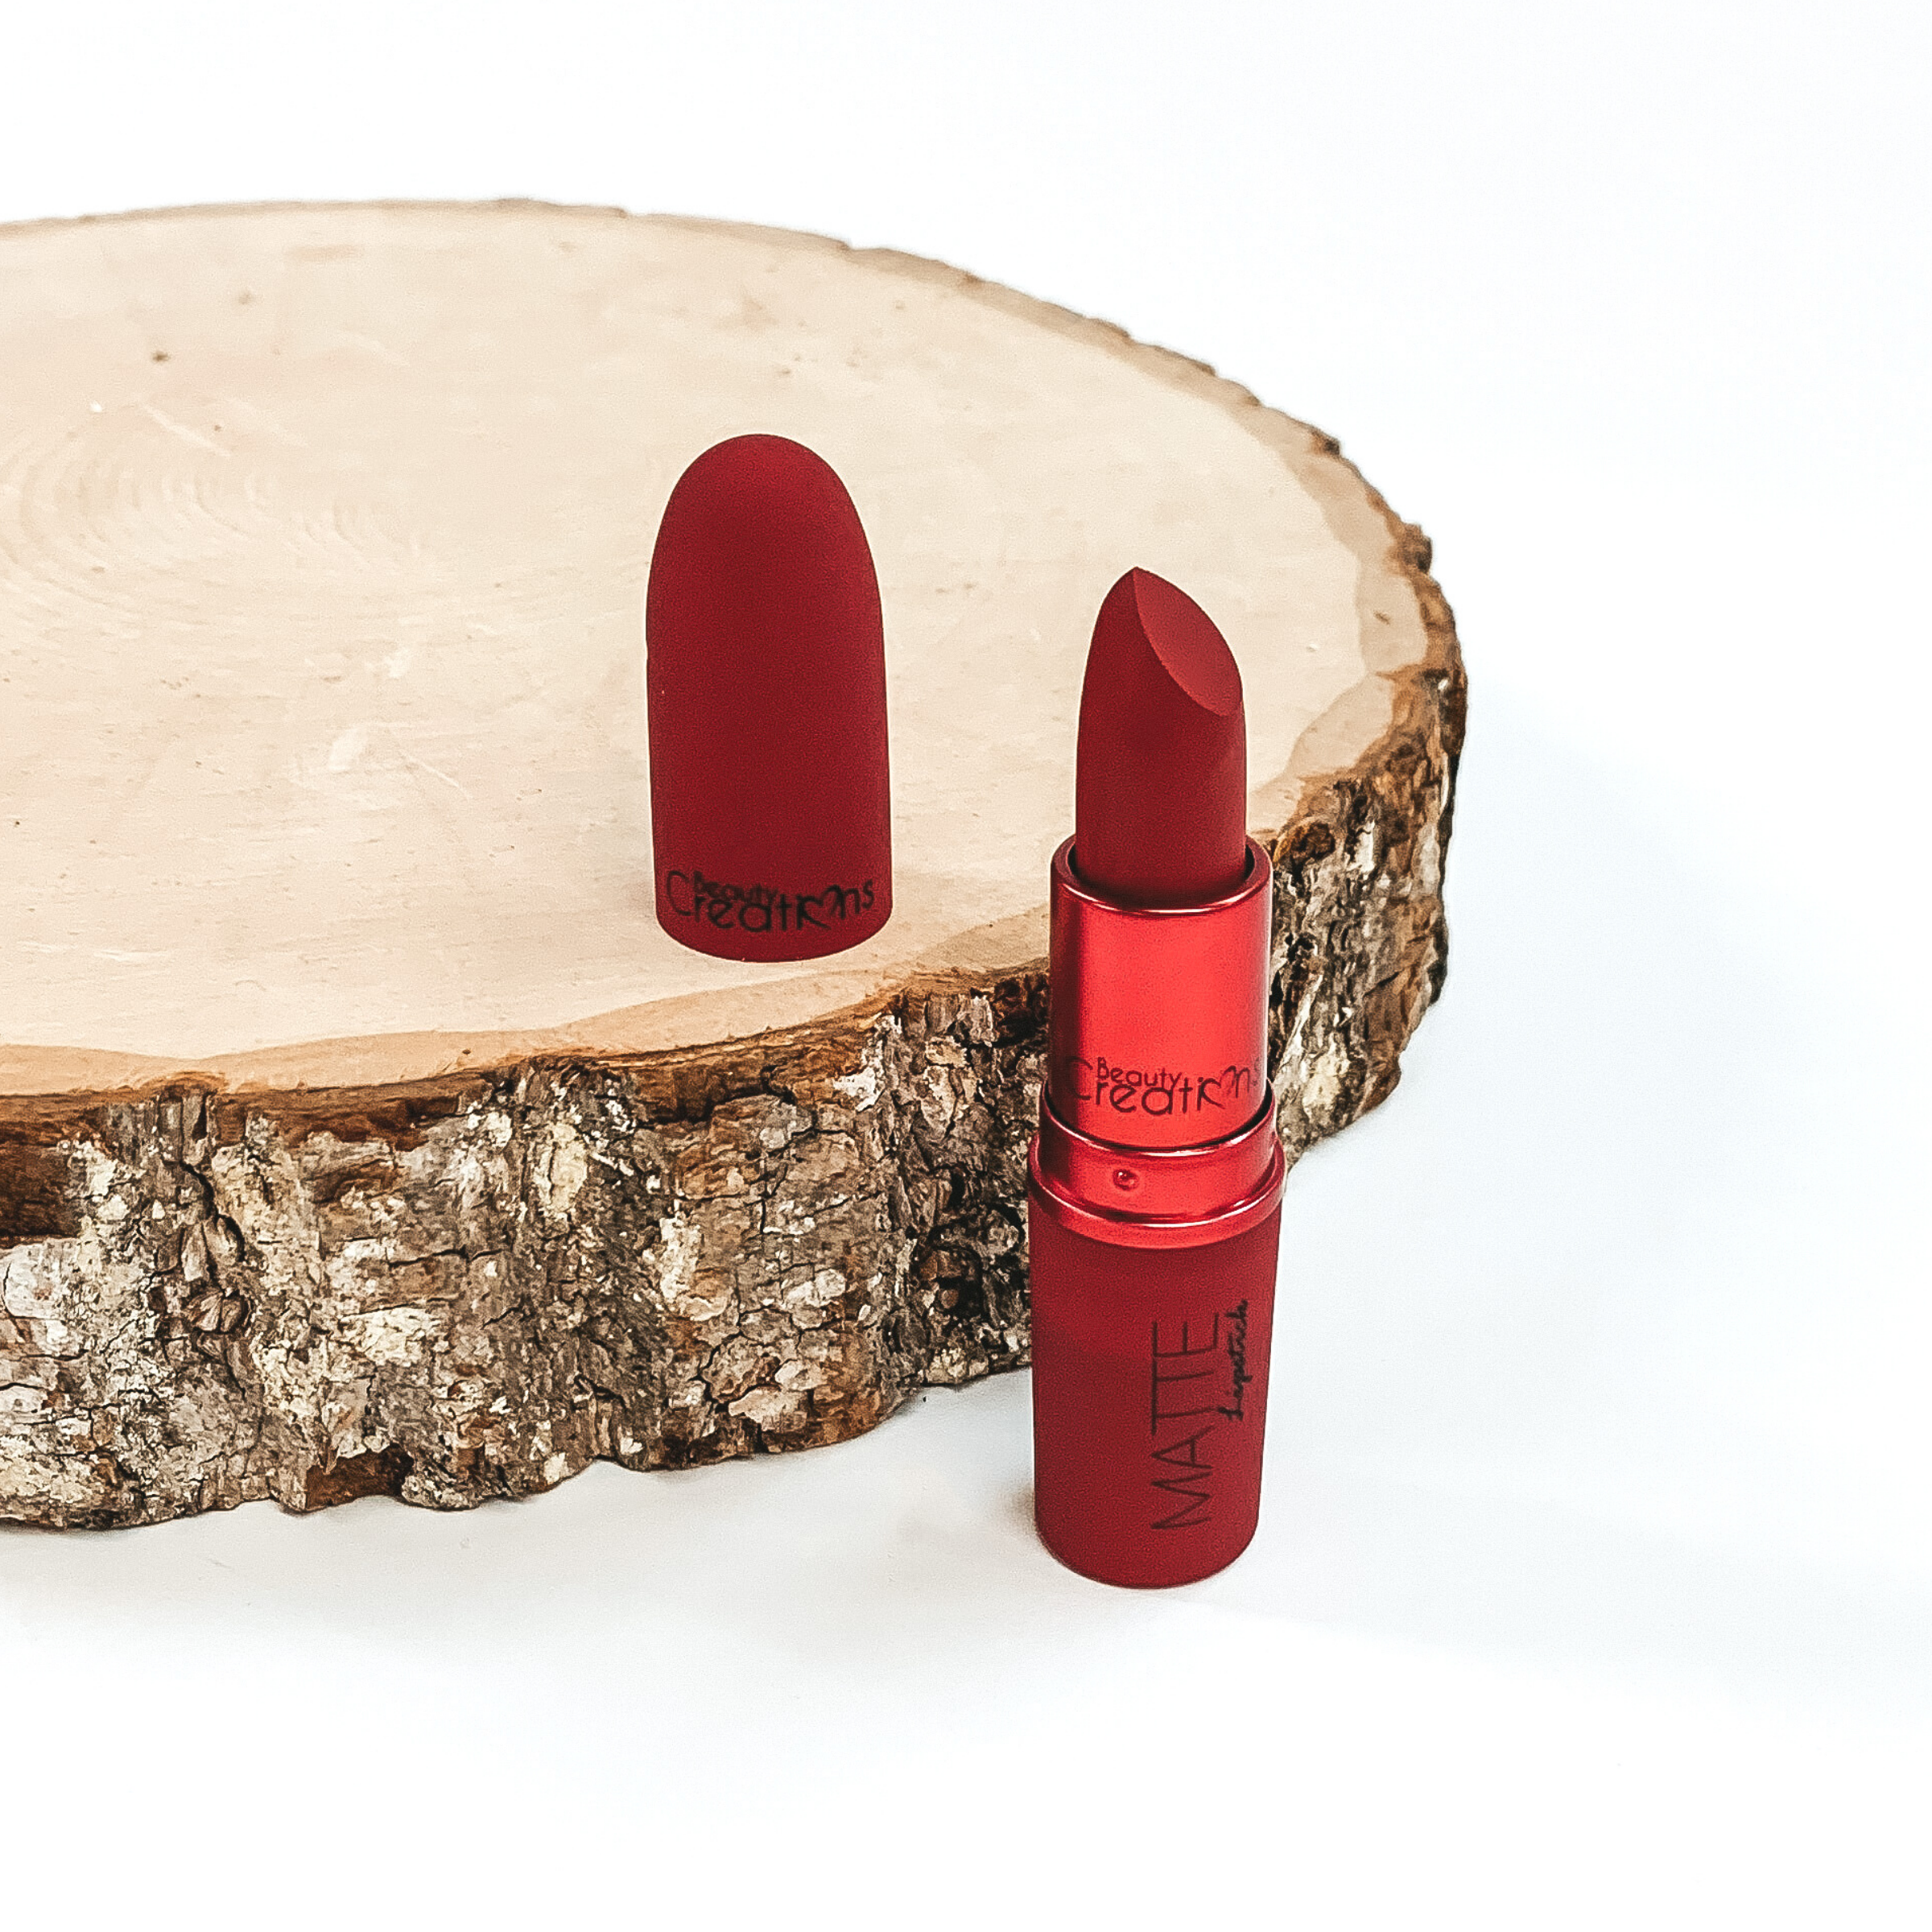 Shade my cherry lipstick that is opened and twisted up. The tube is standing on a white background and next to it is some wood that the lid from the lipstick is placed on.